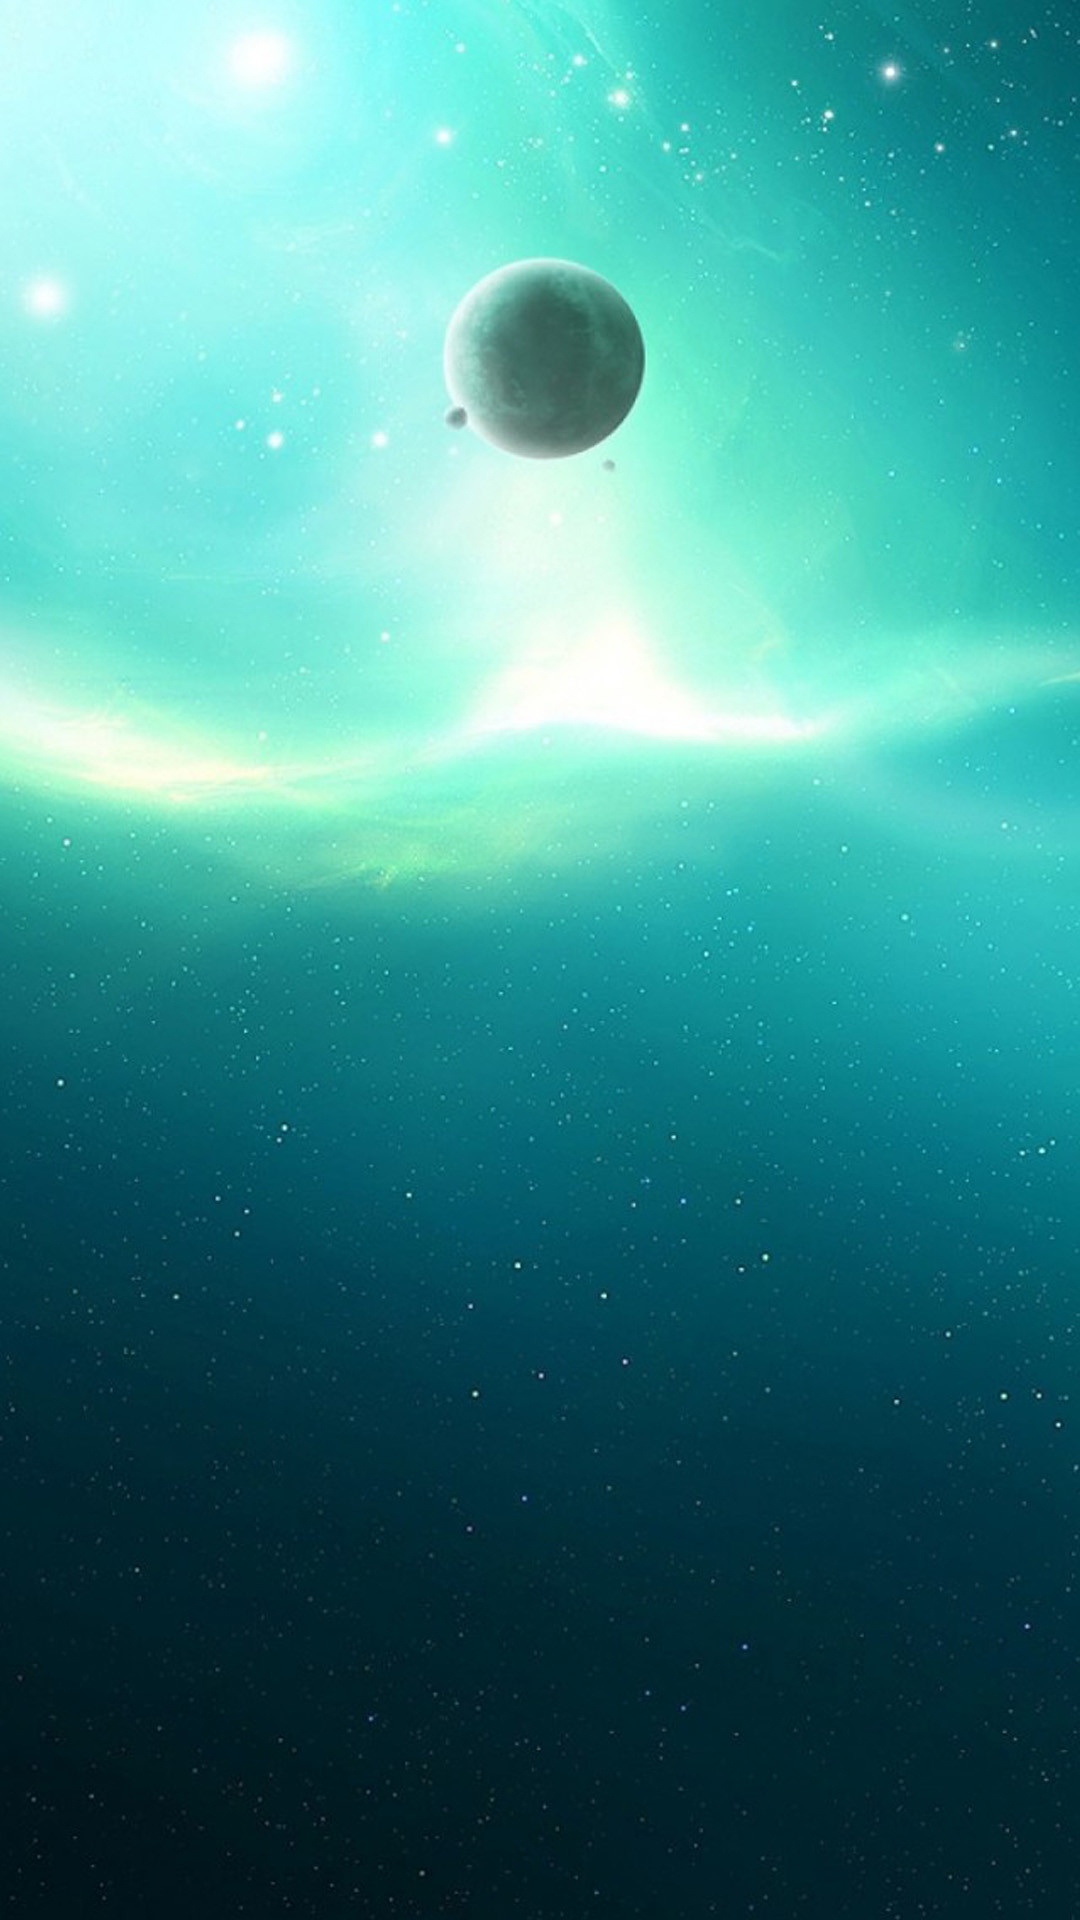 lg g2 hd wallpaper,sky,atmosphere,outer space,astronomical object,light